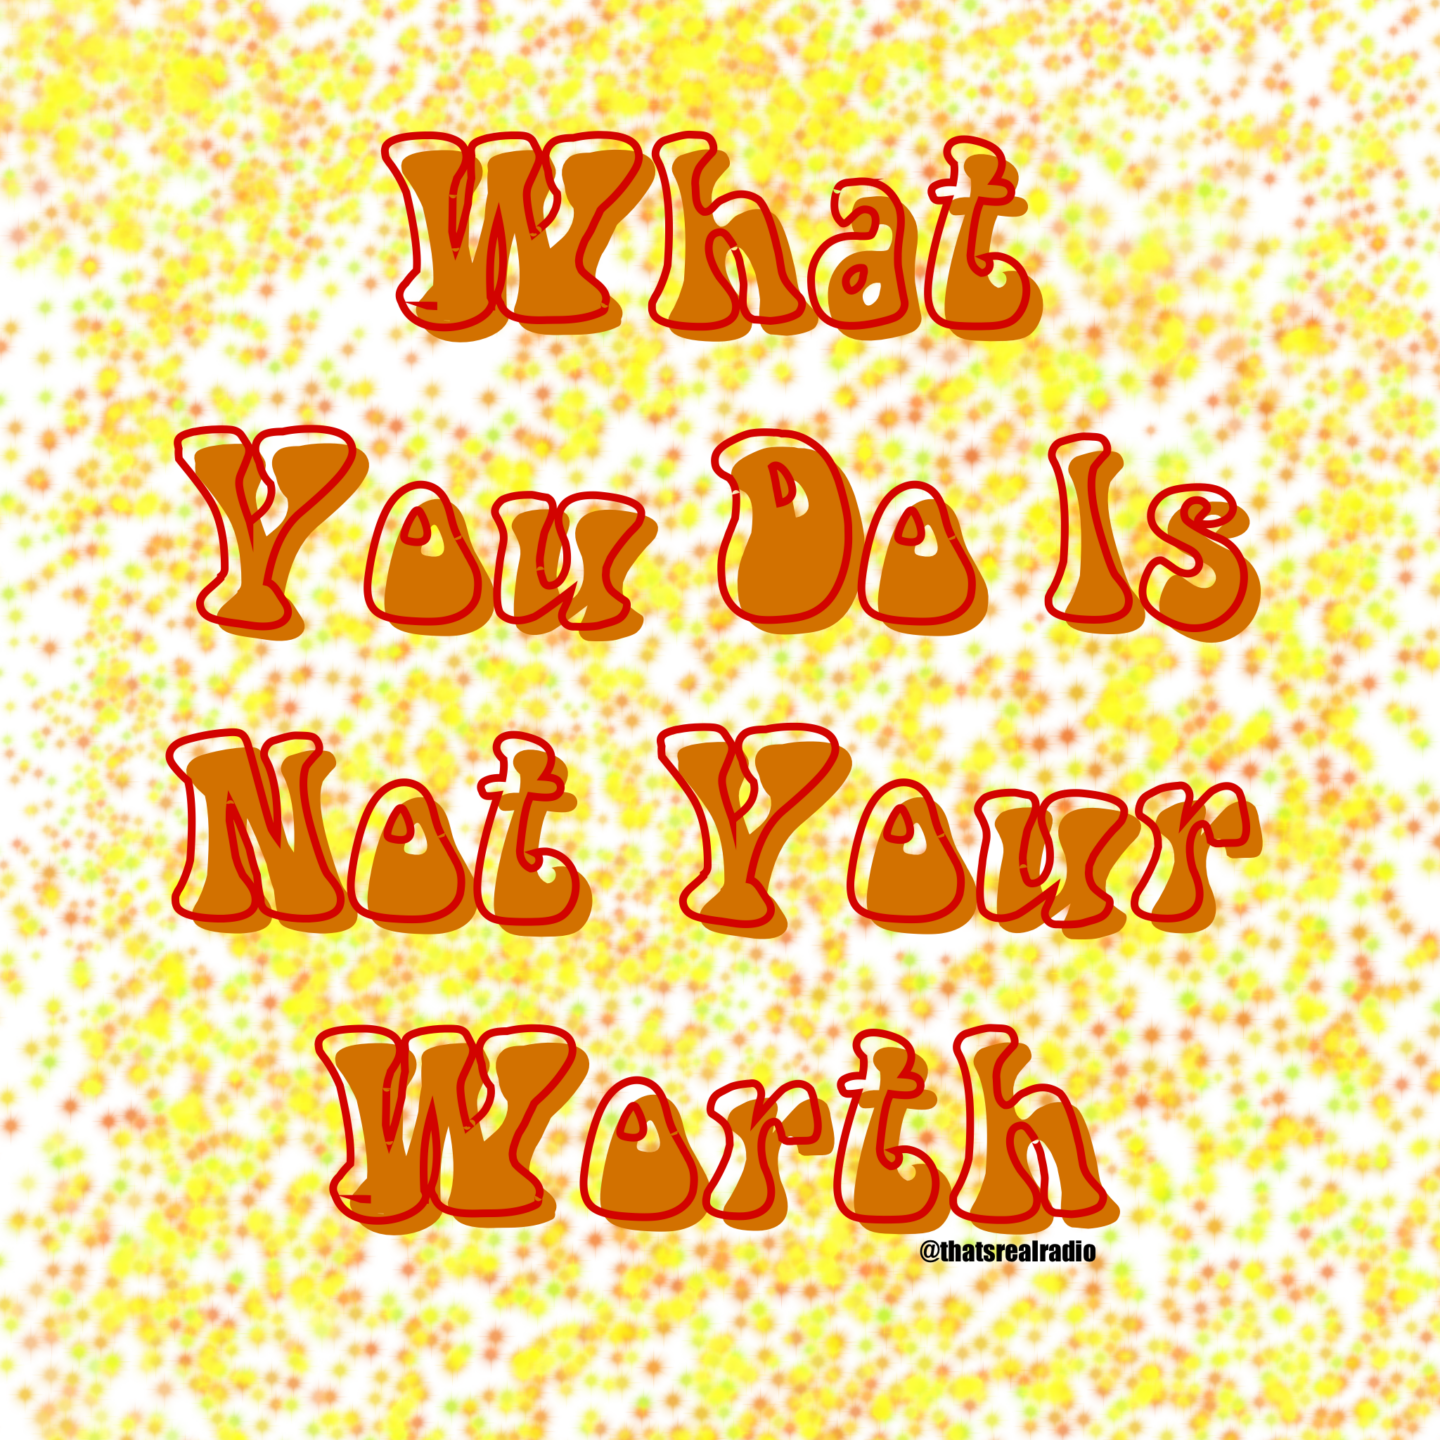 What You Do is Not Your Worth